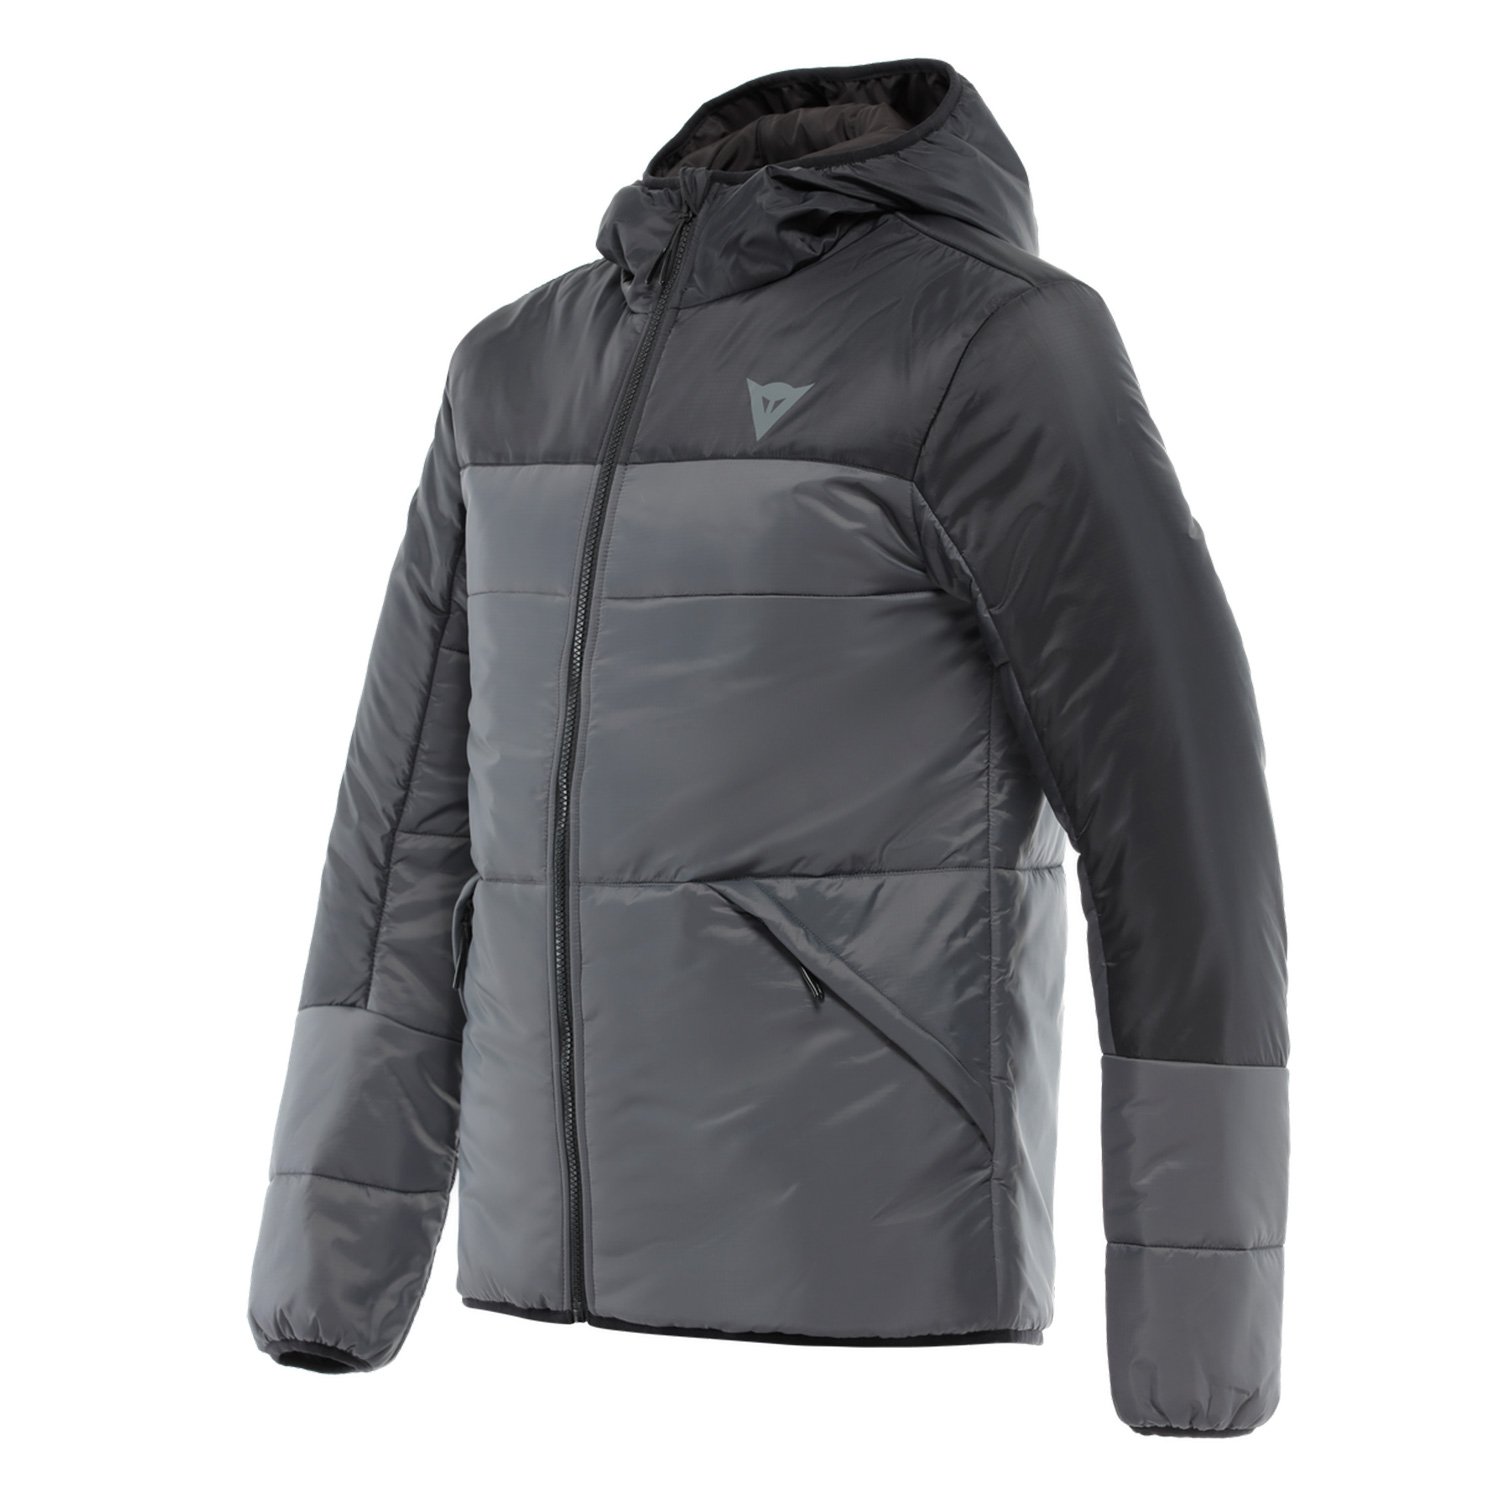 Image of Dainese After Ride Insulated Jacket Anthracite Size 2XL ID 8051019657602